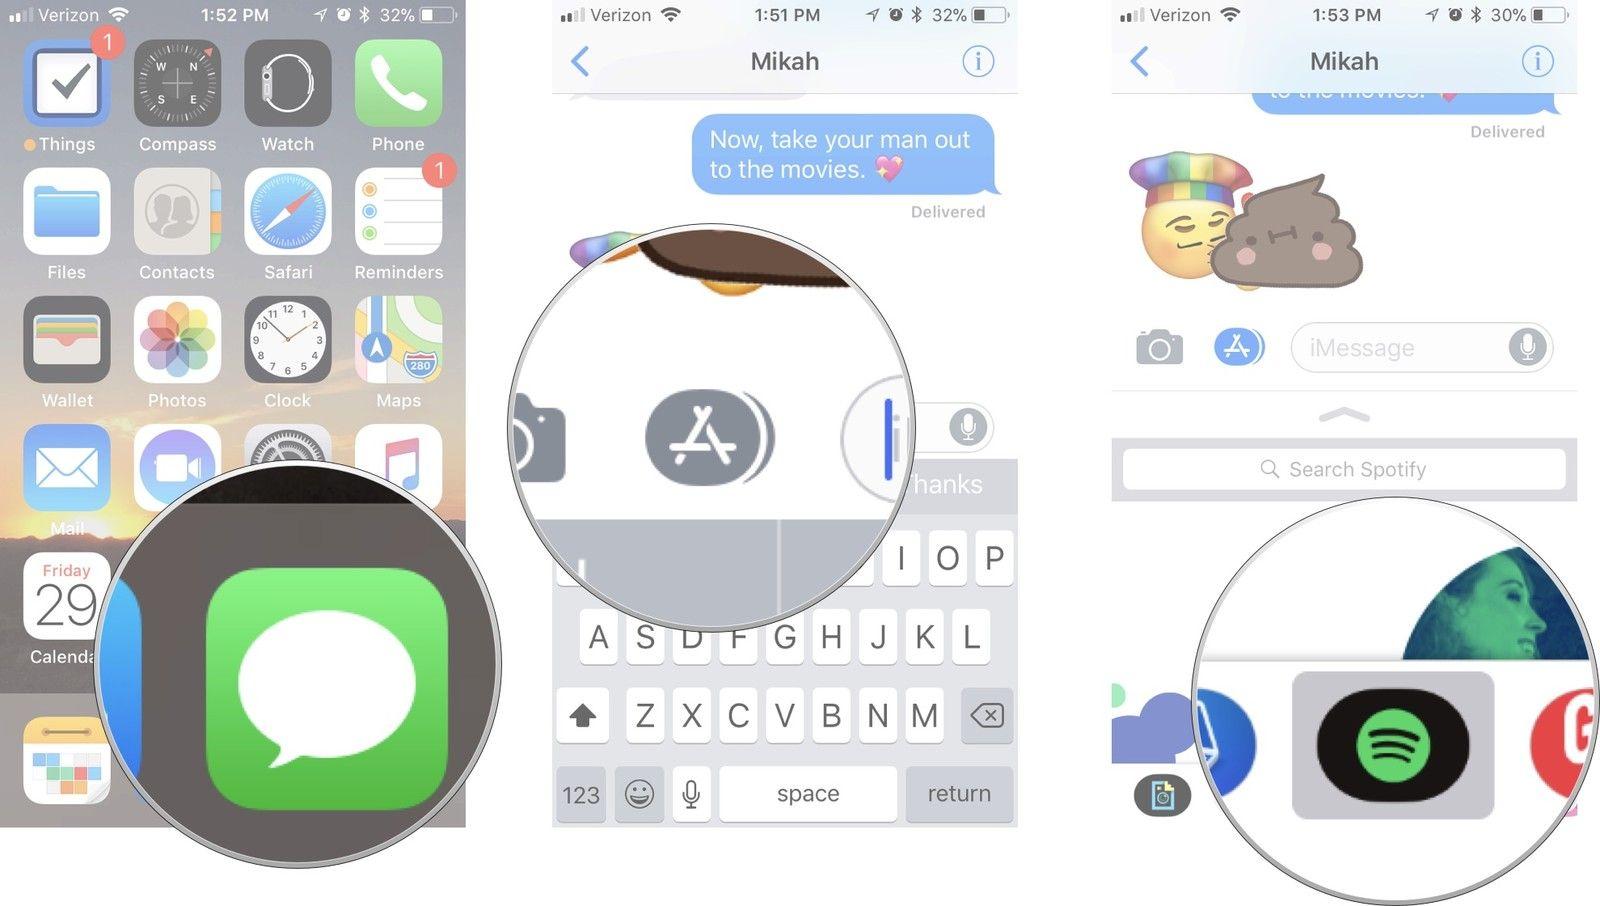 iMessage App Logo - How to use sticker and apps in iMessage on iPhone and iPad | iMore